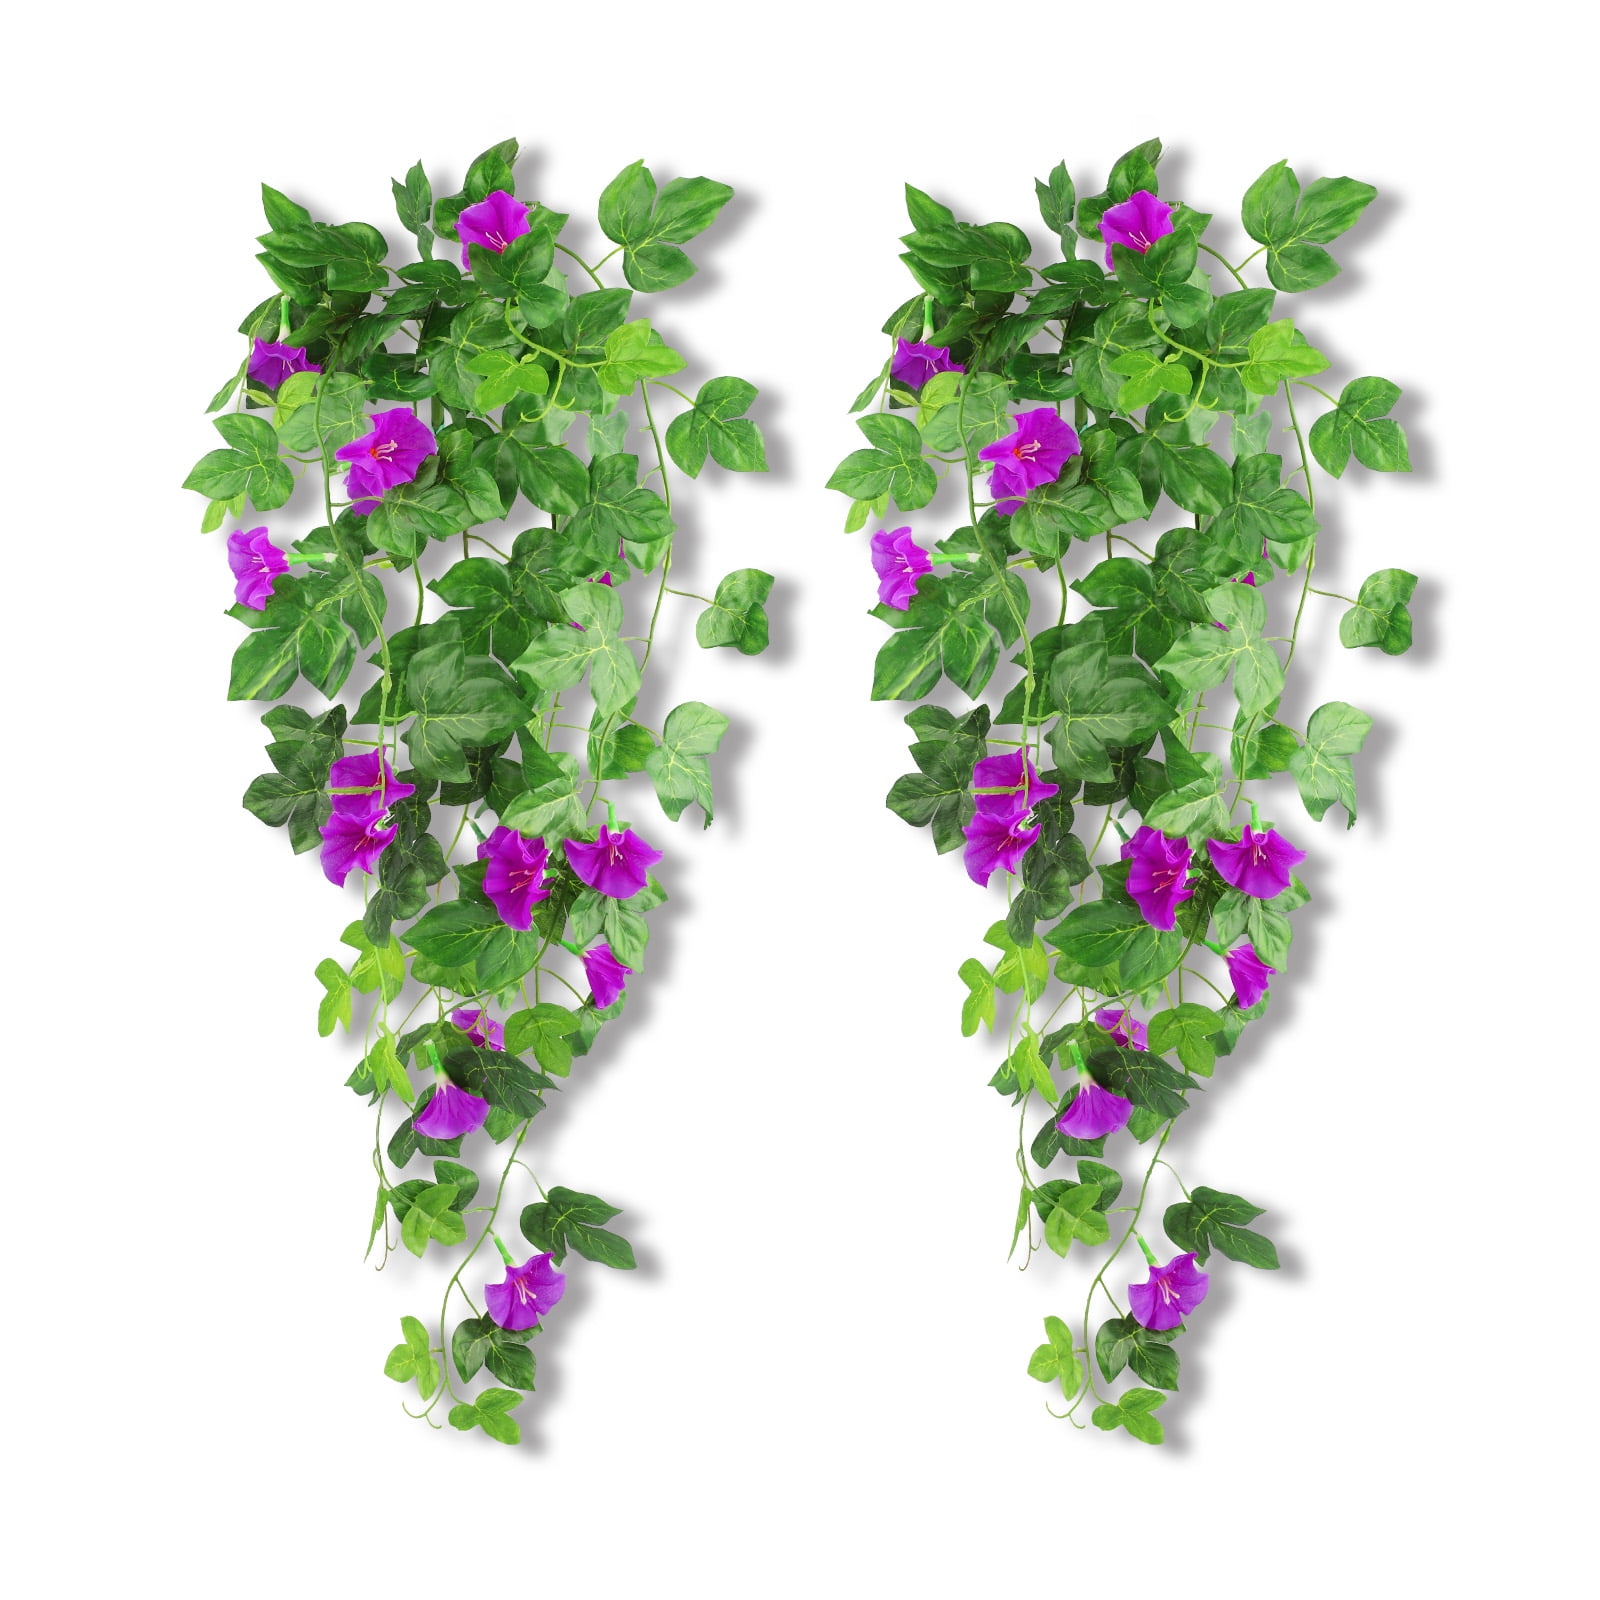  FERIAL Artificial Vines for Decoration with Flowers 2 Pcs  Hanging Plants Silk Garland White Morning Glory Vine Artificial Plants  Outdoors 15Feet Fake Vine Plants for Wedding Indoor Wall Fence Baskets 